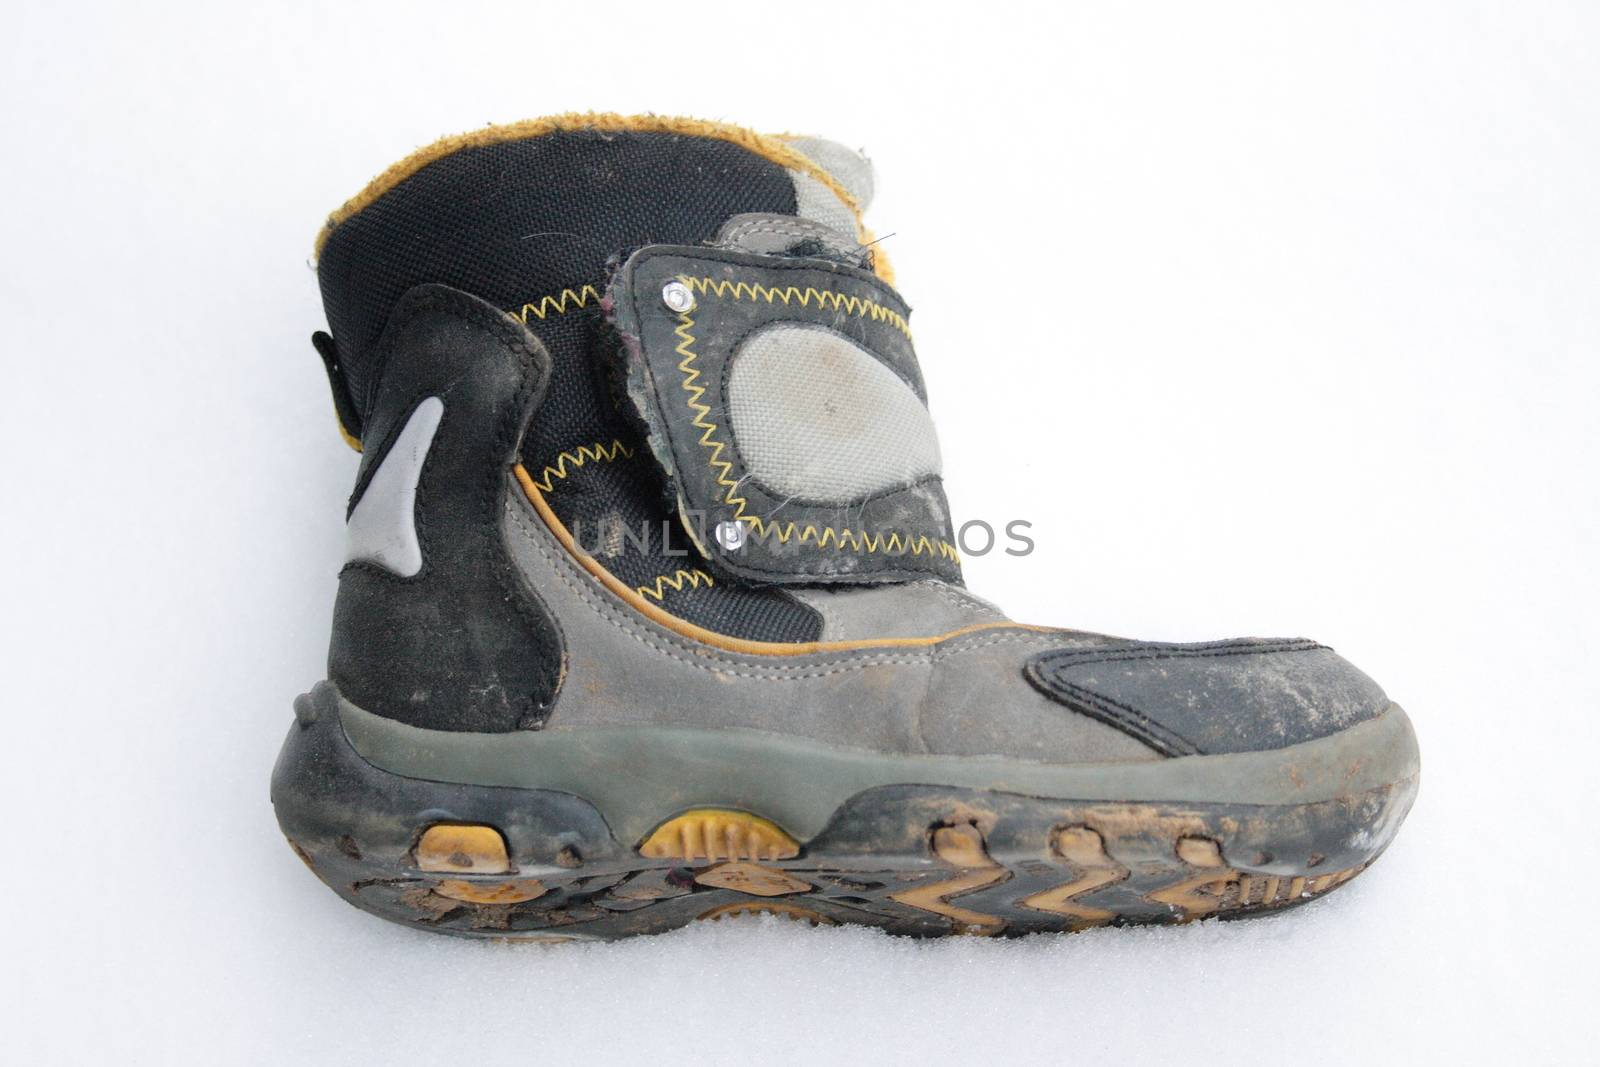 used winter boots lying in the snow by hadot